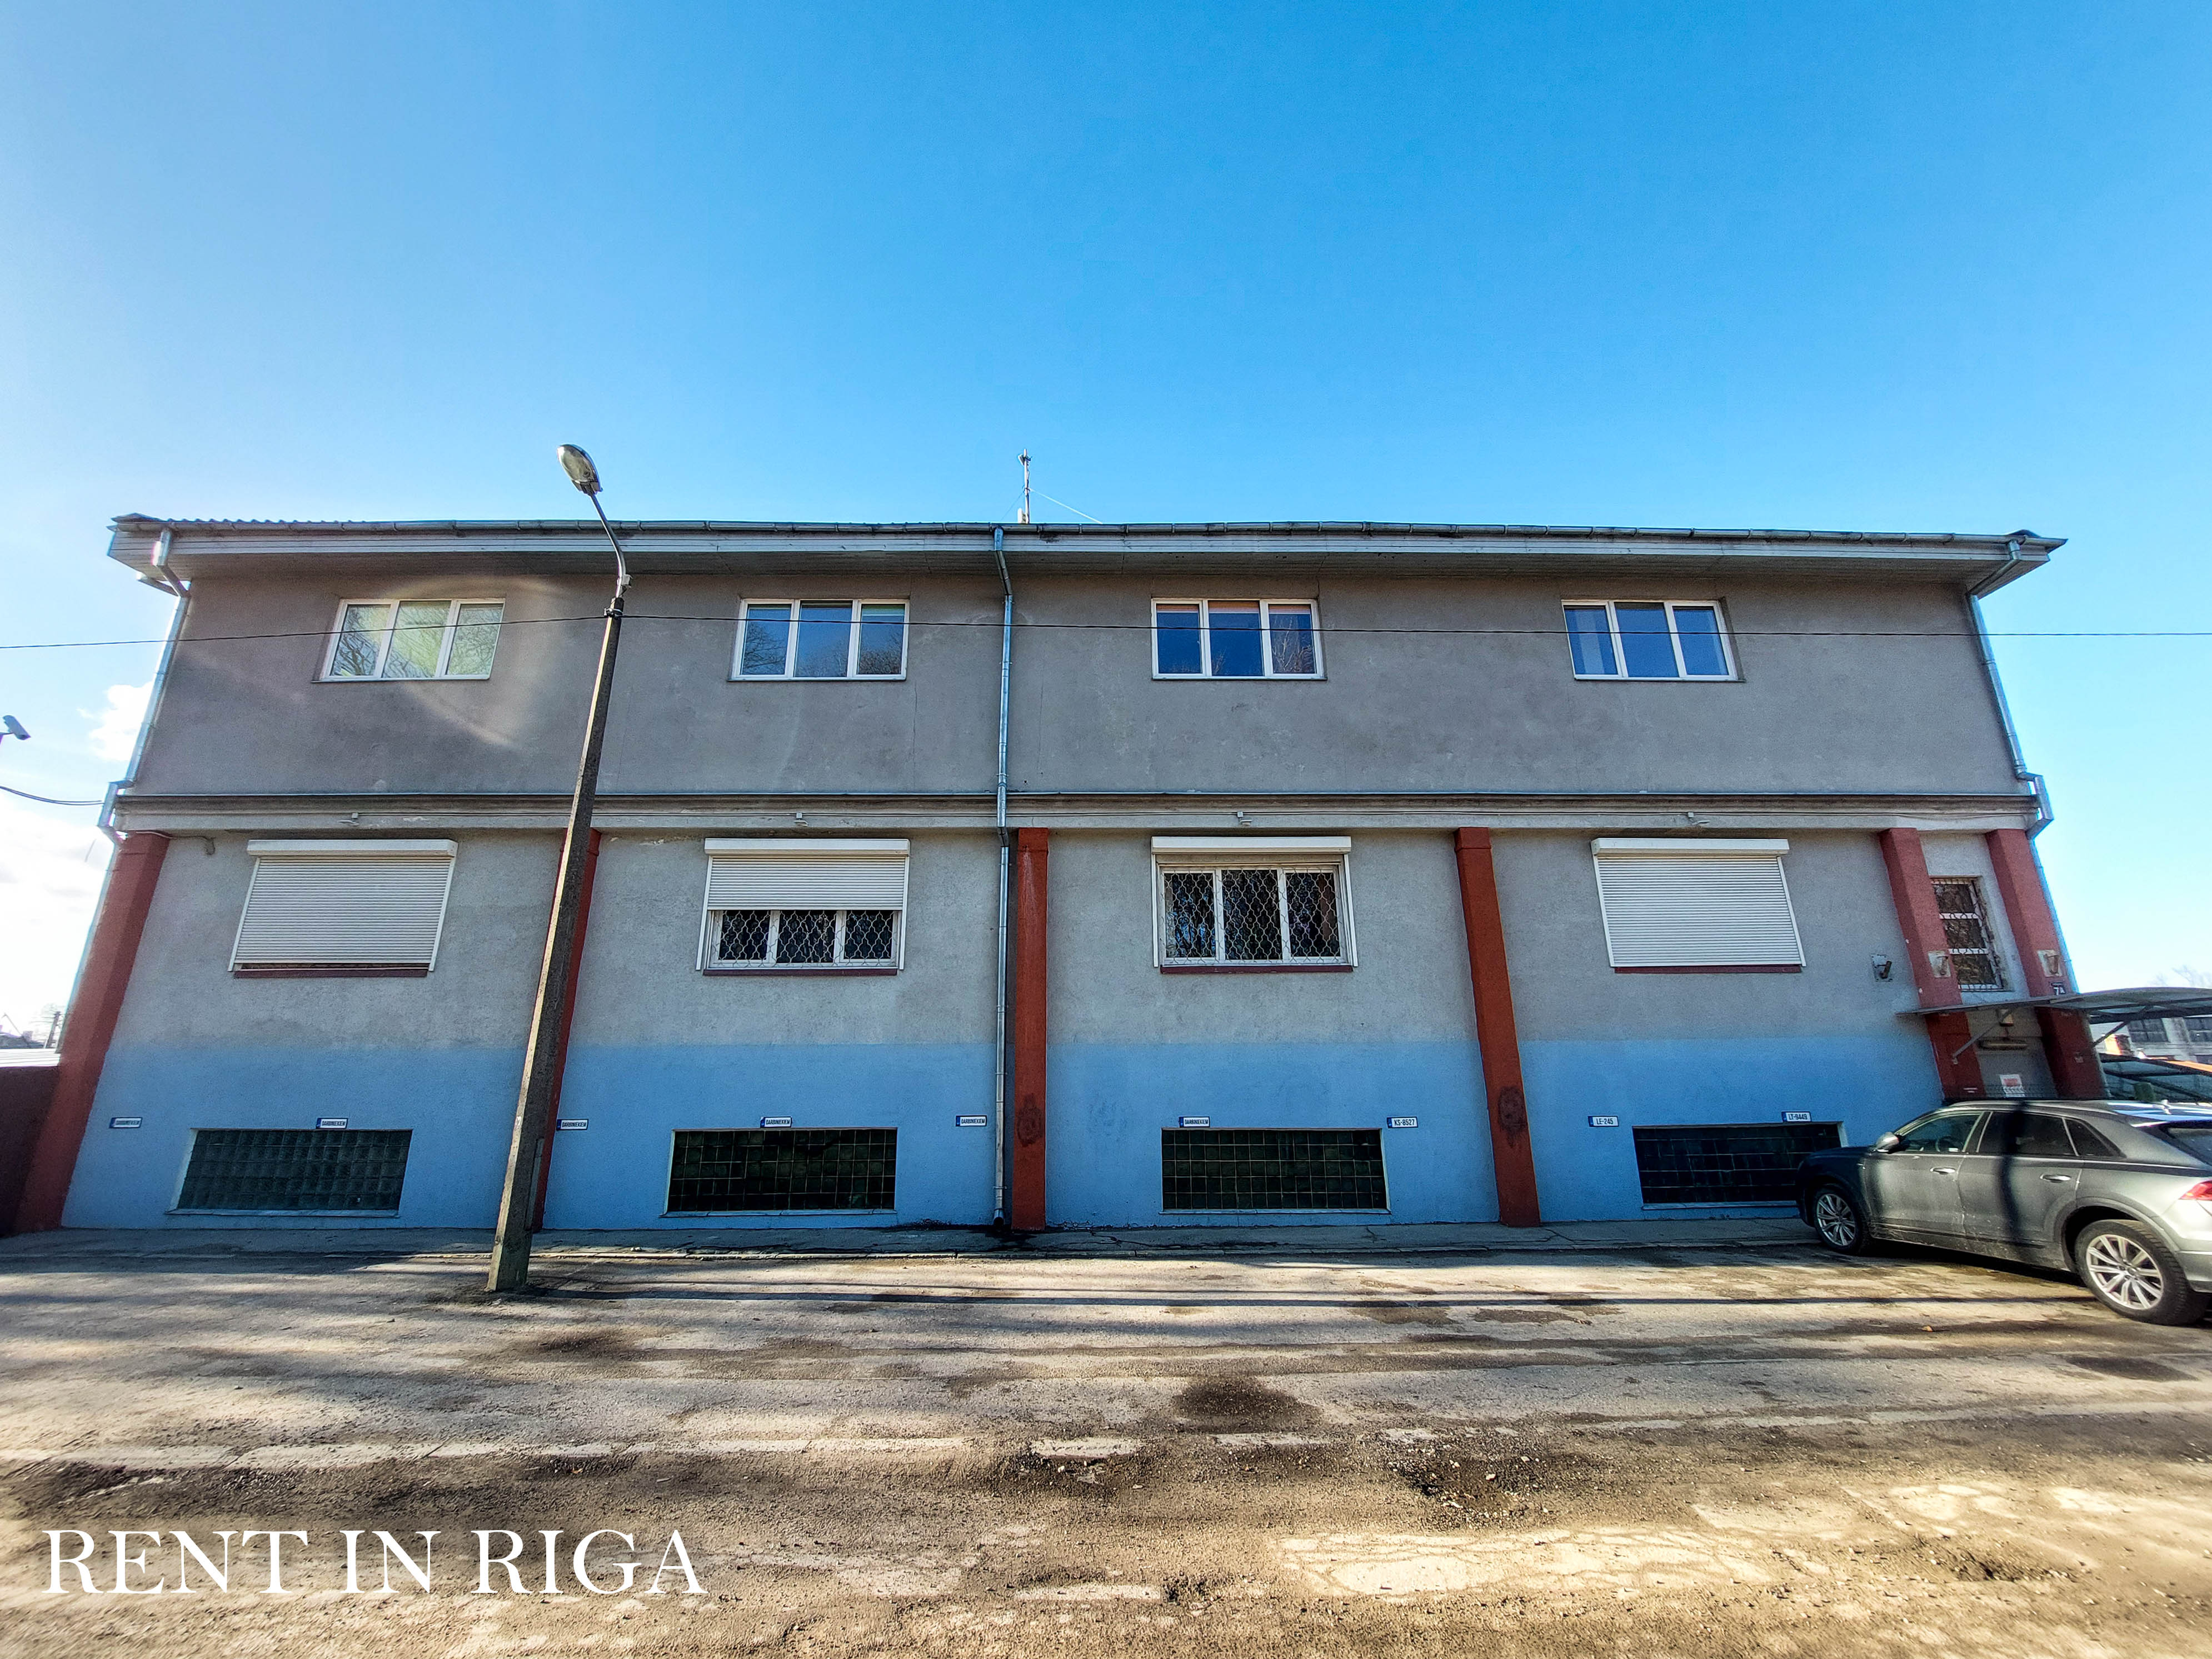 Office for rent, Indriķa street - Image 1